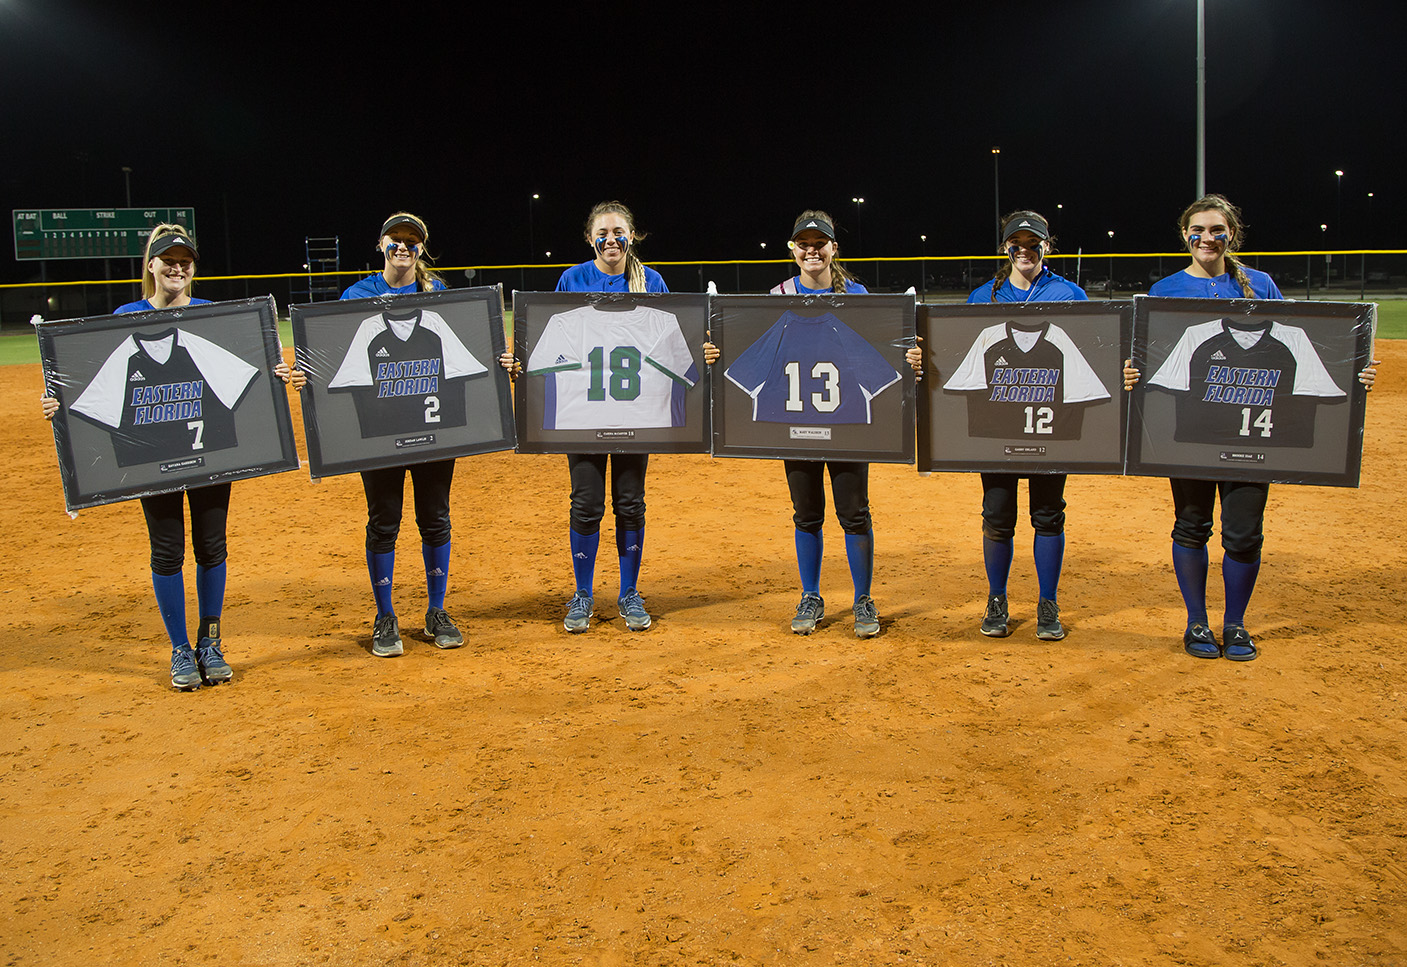 Sophomores honored after doubleheader with Indian River State